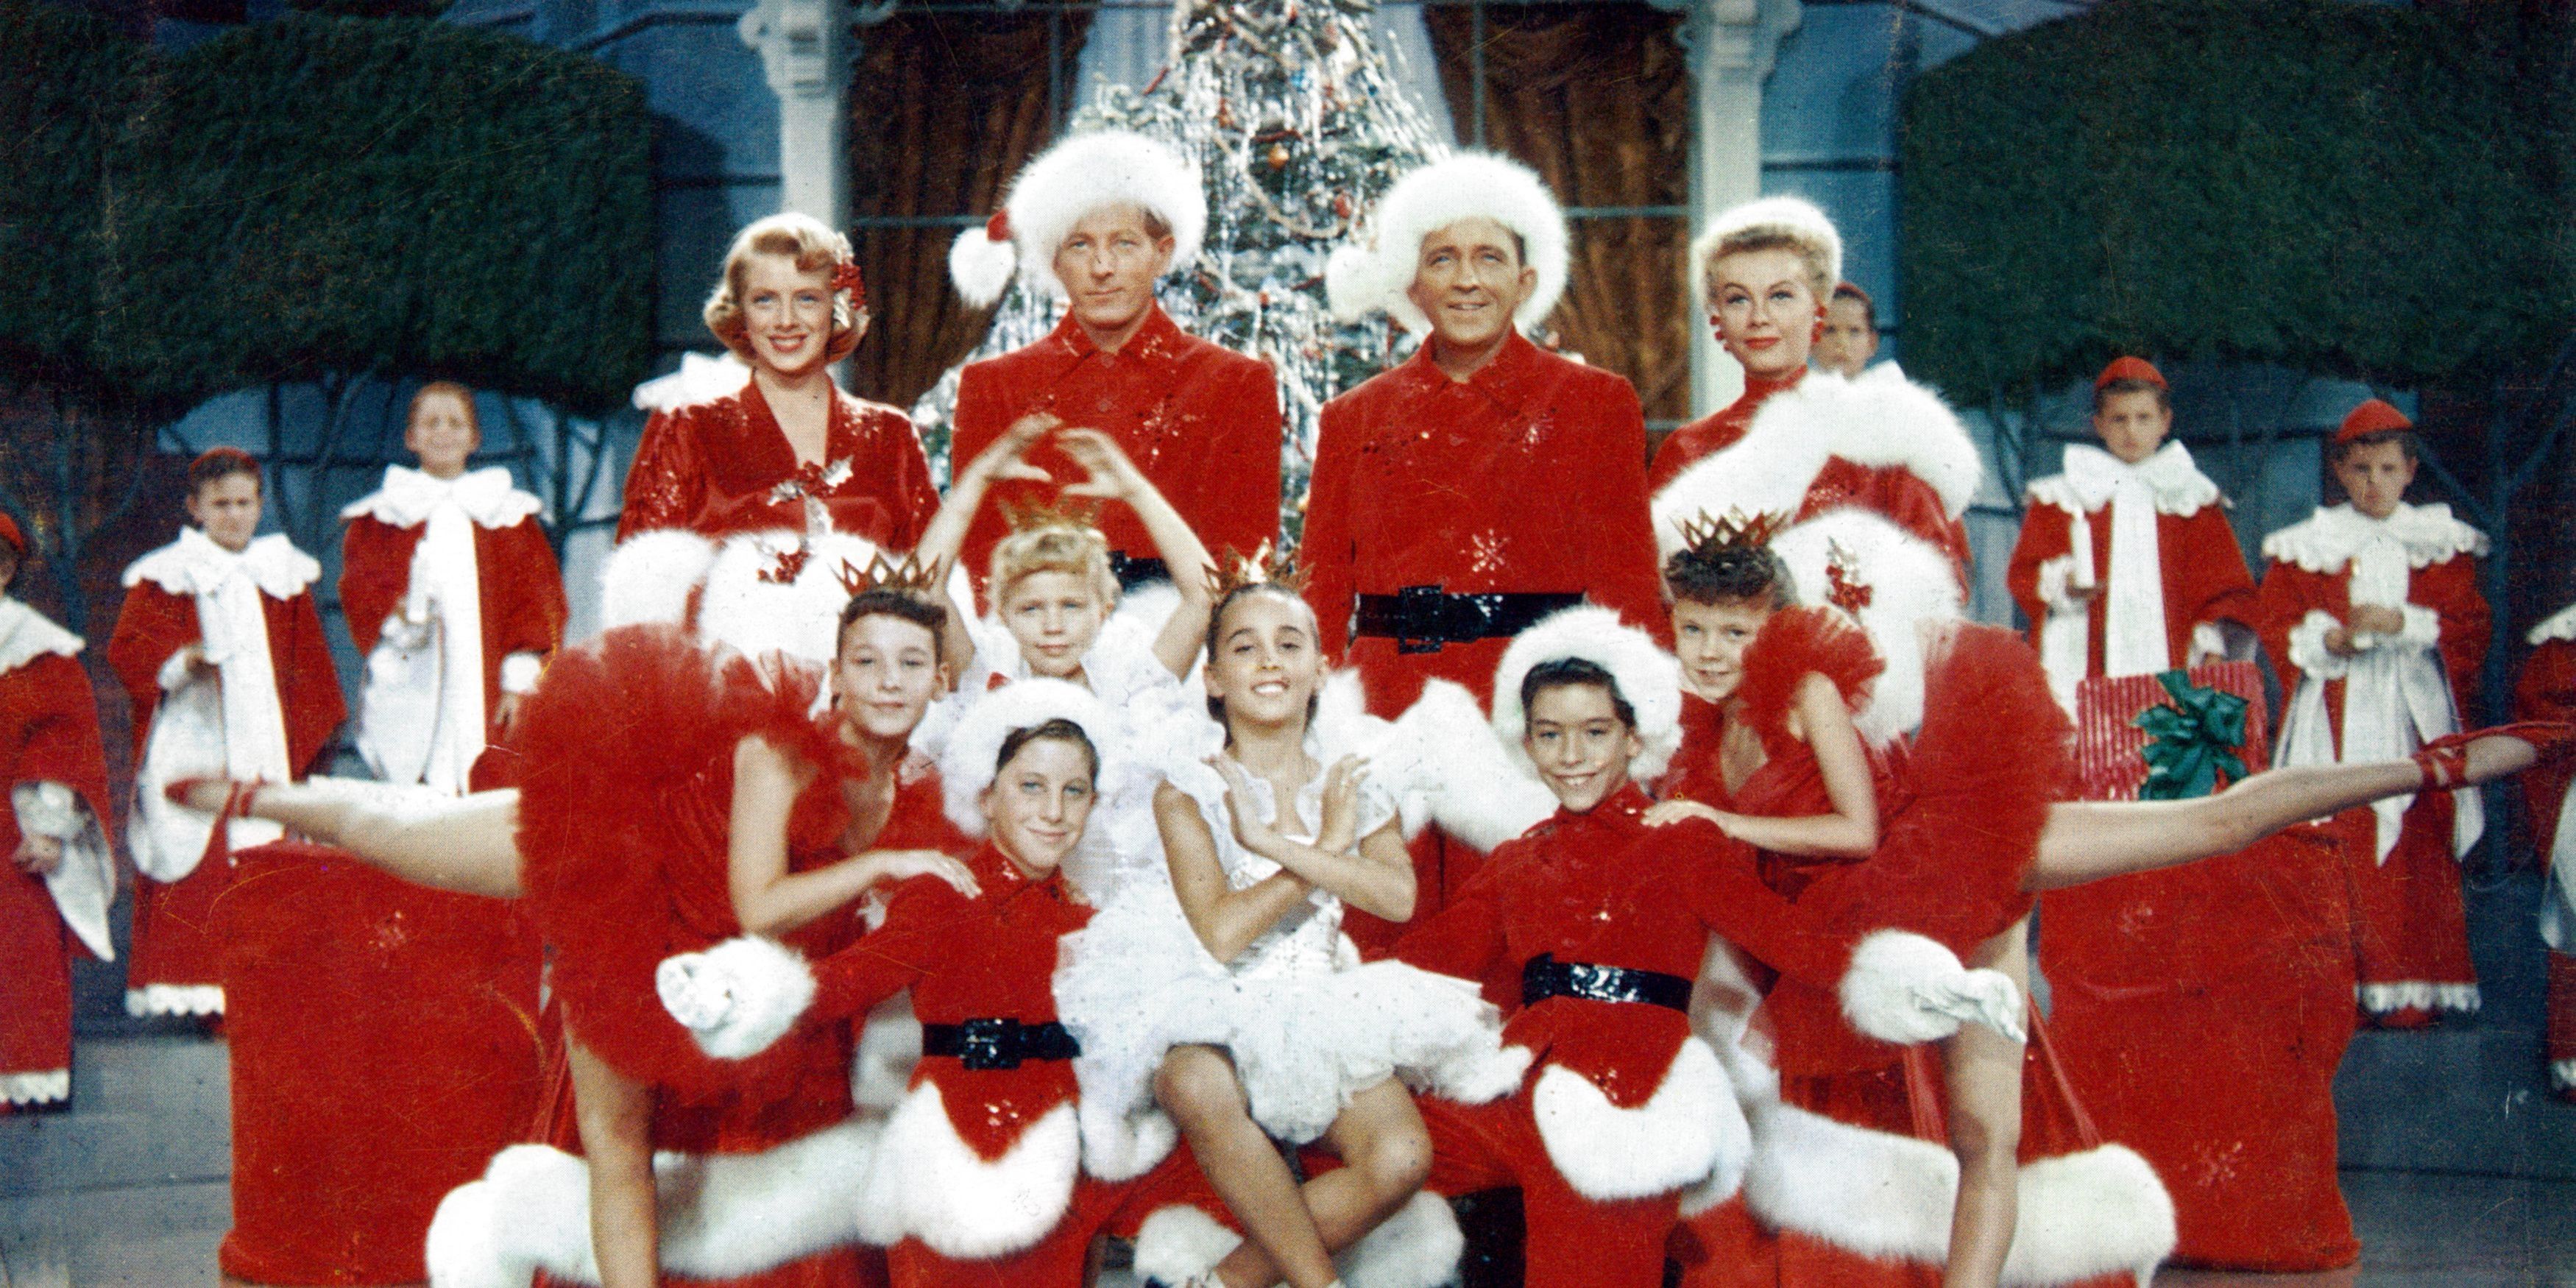 The cast of the musical within White Christmas posing as they sing in red and white outfits